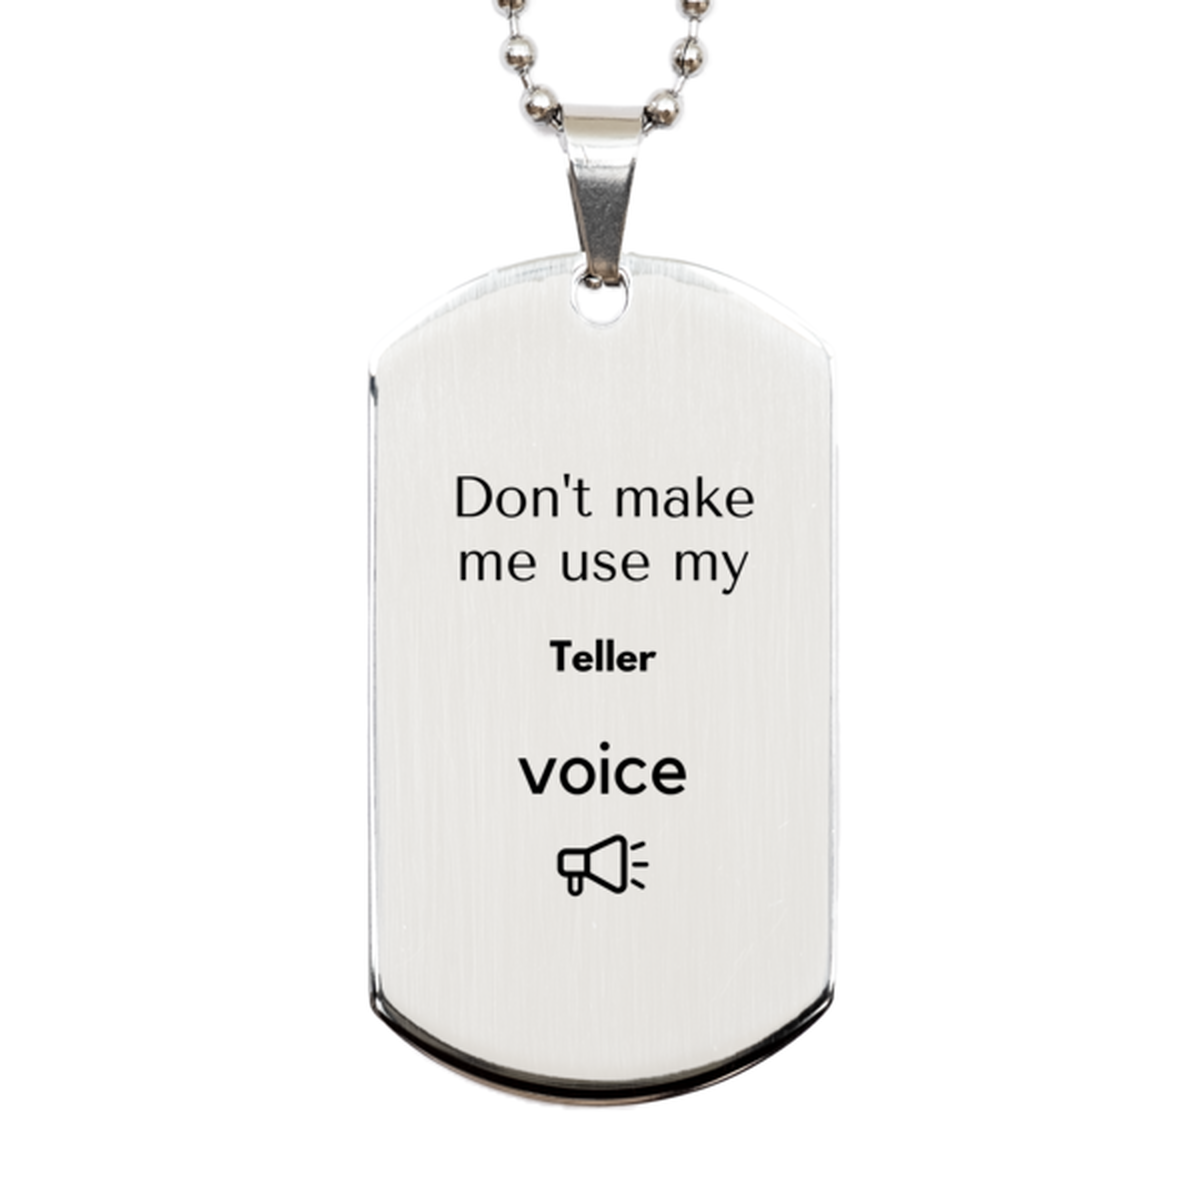 Don't make me use my Teller voice, Sarcasm Teller Gifts, Christmas Teller Silver Dog Tag Birthday Unique Gifts For Teller Coworkers, Men, Women, Colleague, Friends